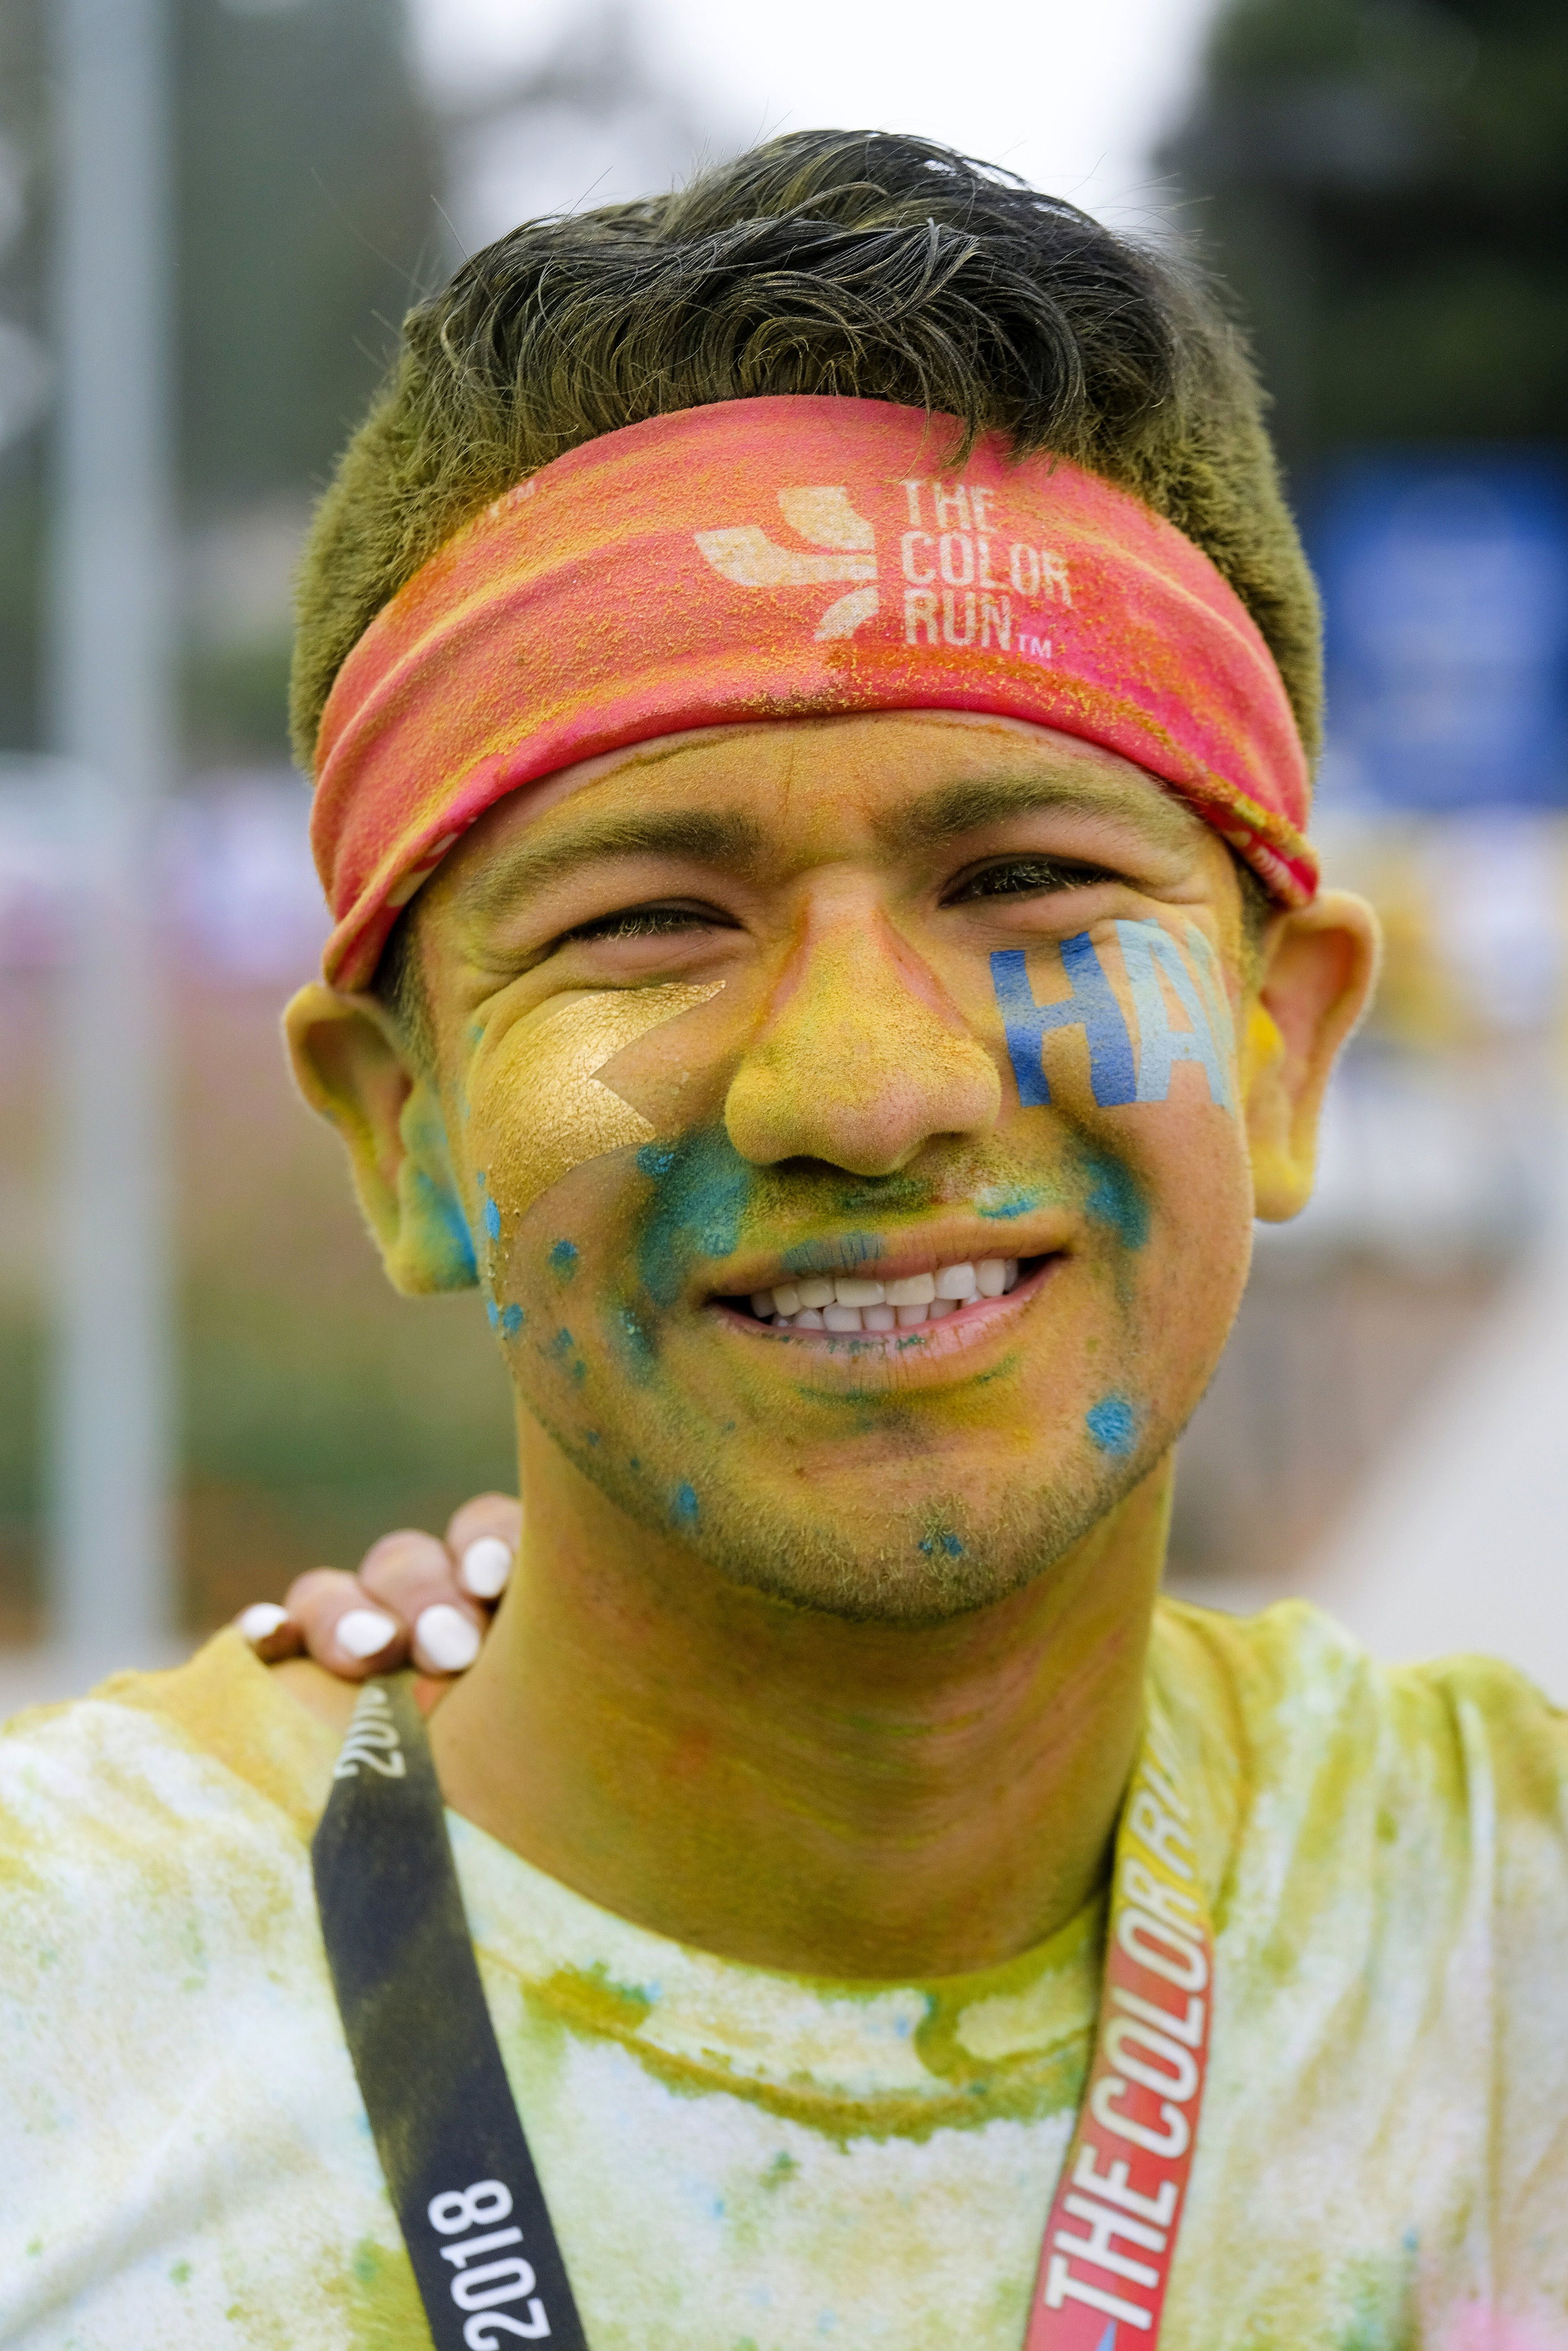  A runner covering with color powder on her face in the Color Run at the StubHub Center in Los Angeles, United States, June 23, 2018. 